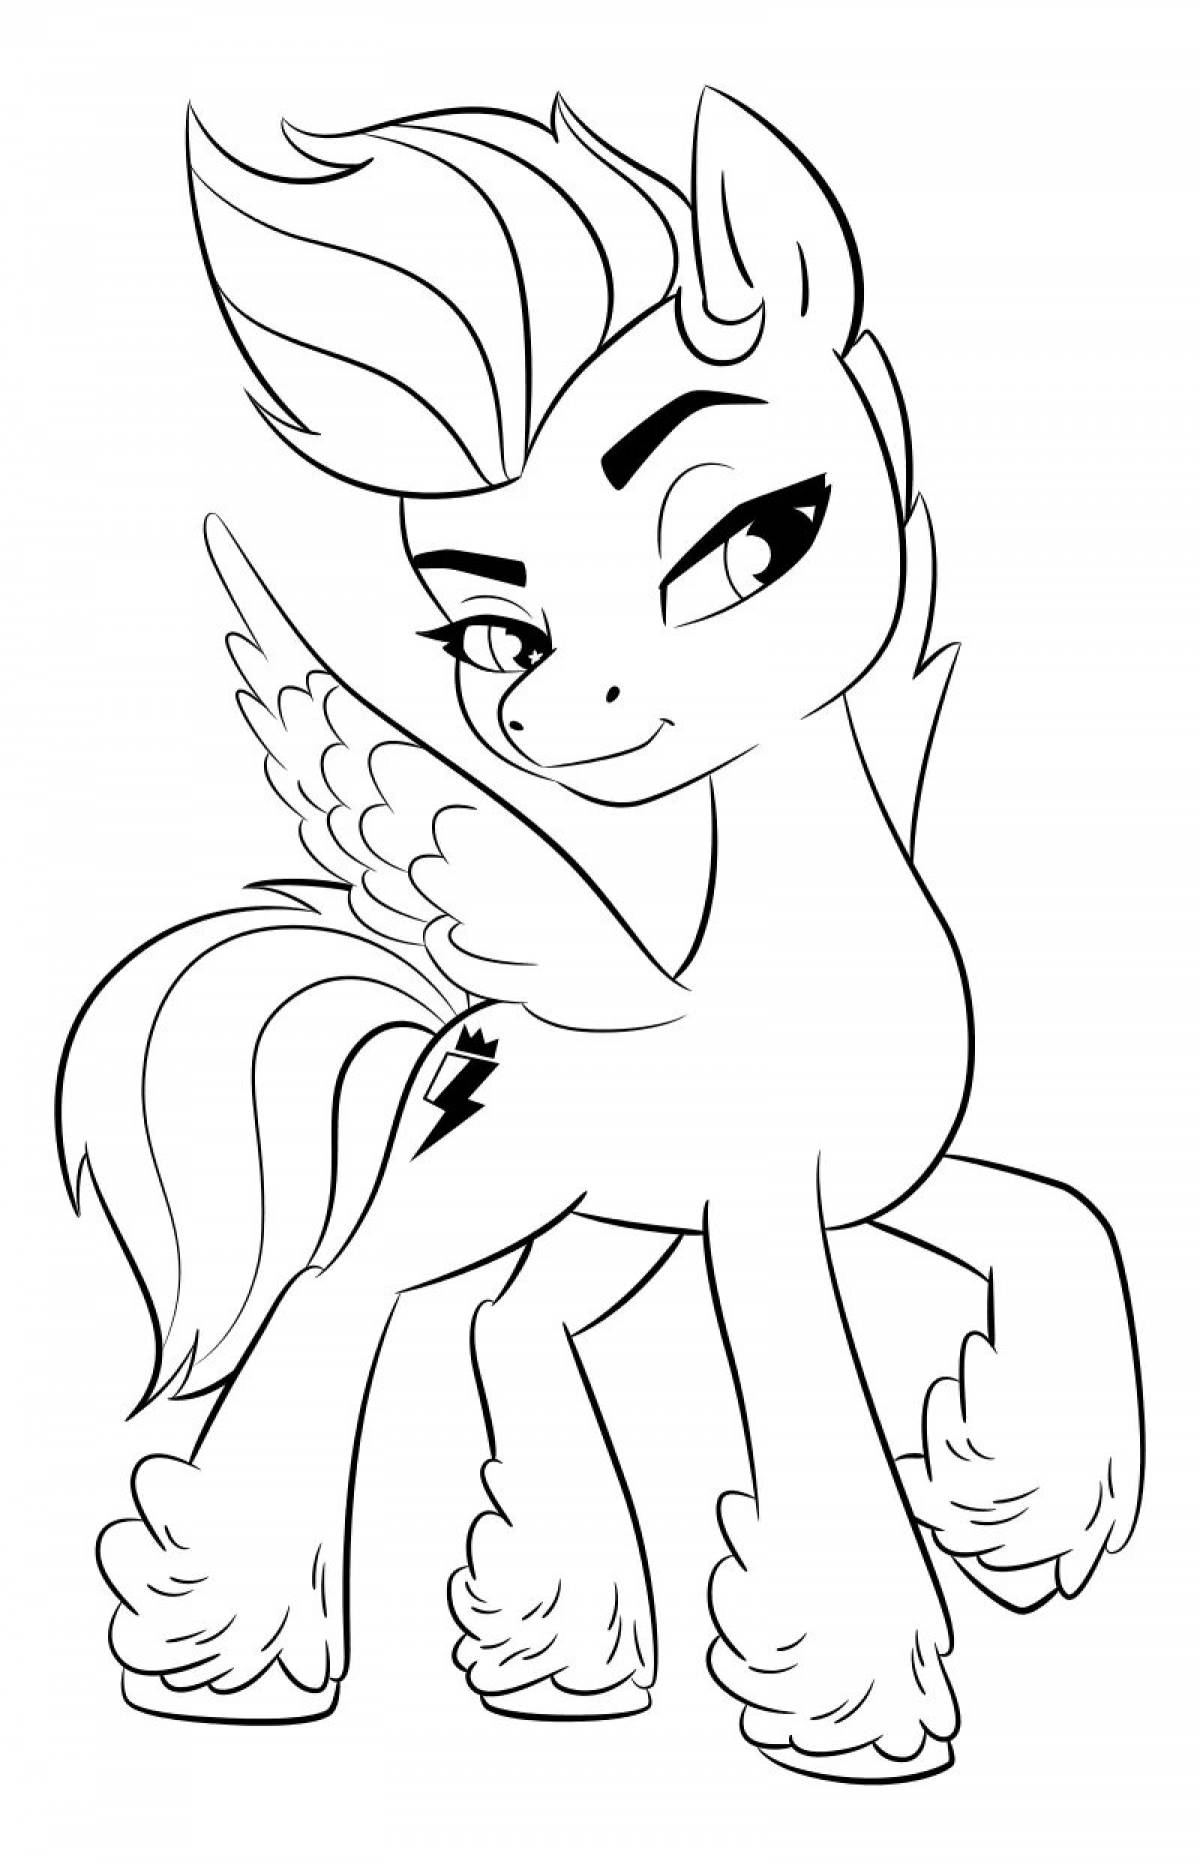 Colorific easy pony coloring page